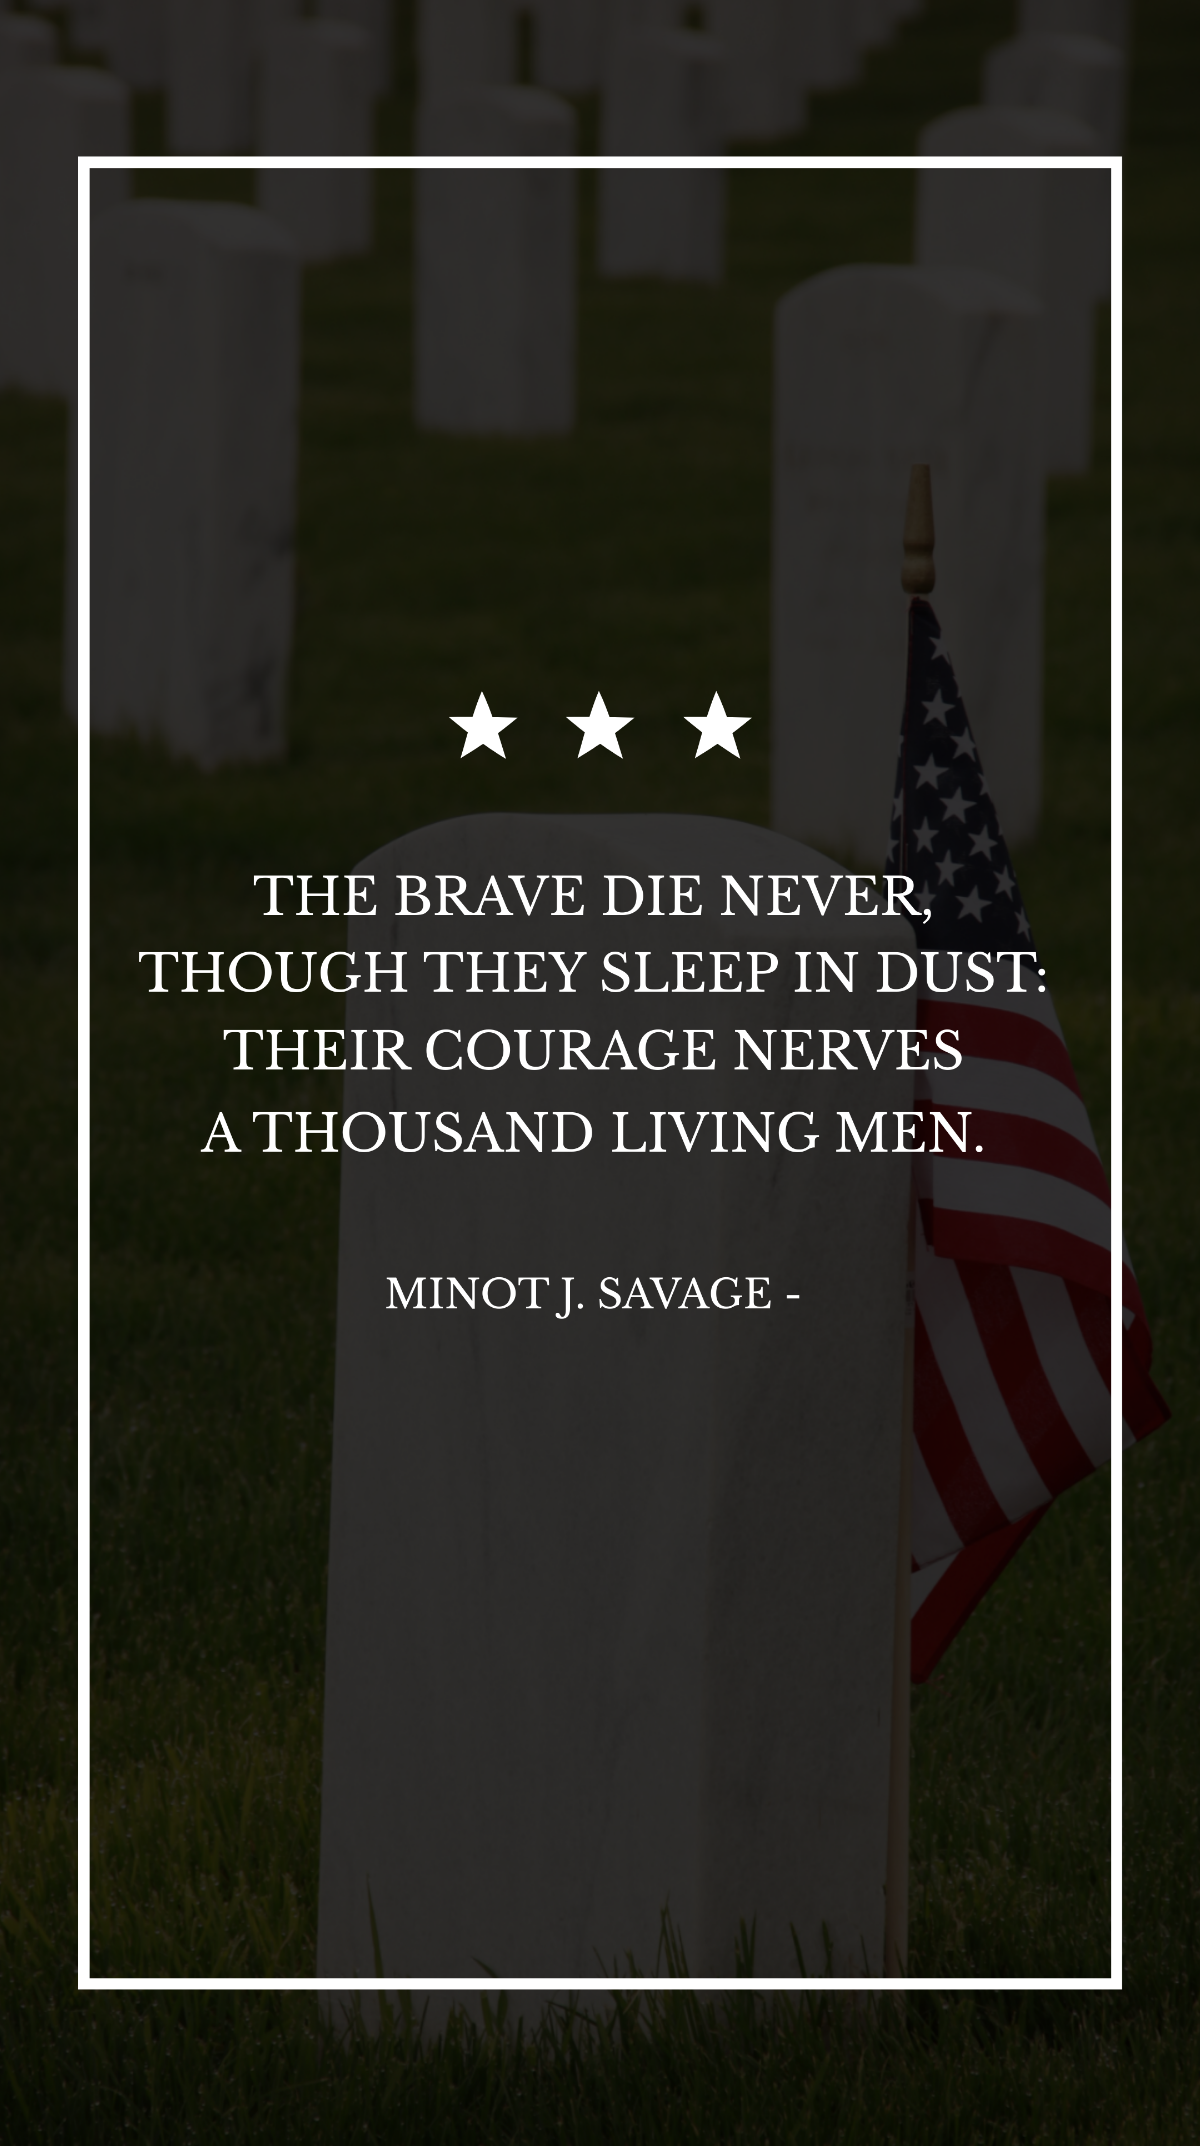 Minot J. Savage - The brave die never, though they sleep in dust: Their courage nerves a thousand living men. Template